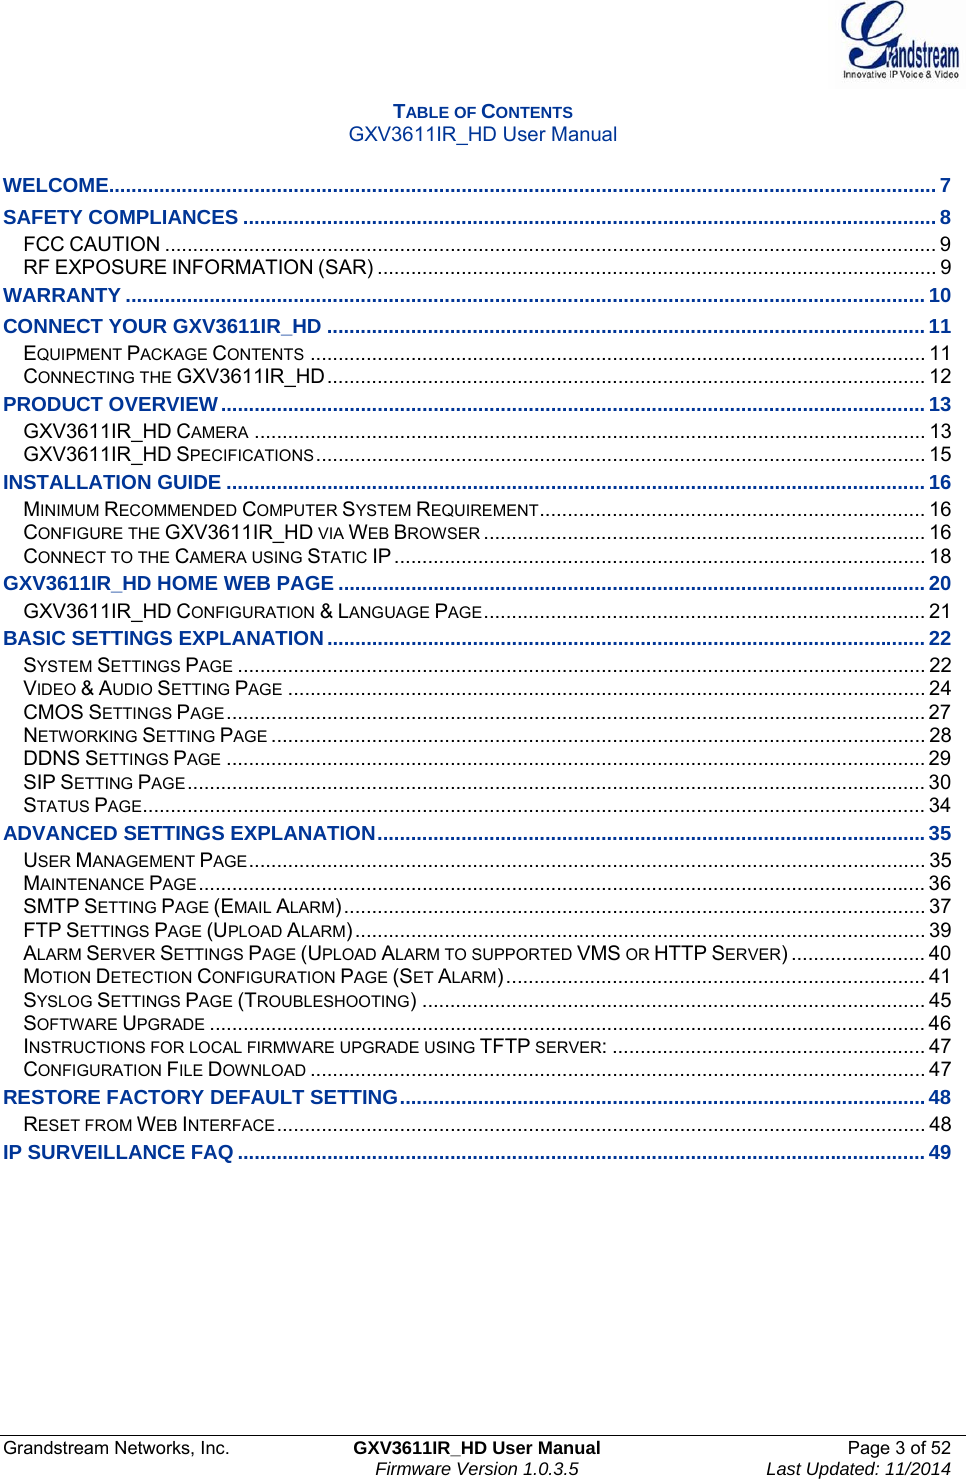  Grandstream Networks, Inc.  GXV3611IR_HD User Manual  Page 3 of 52    Firmware Version 1.0.3.5  Last Updated: 11/2014 TABLE OF CONTENTS GXV3611IR_HD User Manual  WELCOME.................................................................................................................................................... 7SAFETY COMPLIANCES ............................................................................................................................ 8FCC CAUTION .......................................................................................................................................... 9RF EXPOSURE INFORMATION (SAR) .................................................................................................... 9WARRANTY ............................................................................................................................................... 10CONNECT YOUR GXV3611IR_HD ........................................................................................................... 11EQUIPMENT PACKAGE CONTENTS .............................................................................................................. 11CONNECTING THE GXV3611IR_HD ...........................................................................................................  12PRODUCT OVERVIEW .............................................................................................................................. 13GXV3611IR_HD CAMERA ........................................................................................................................ 13GXV3611IR_HD SPECIFICATIONS .............................................................................................................  15INSTALLATION GUIDE ............................................................................................................................. 16MINIMUM RECOMMENDED COMPUTER SYSTEM REQUIREMENT ..................................................................... 16CONFIGURE THE GXV3611IR_HD VIA WEB BROWSER ............................................................................... 16CONNECT TO THE CAMERA USING STATIC IP ............................................................................................... 18GXV3611IR_HD HOME WEB PAGE ......................................................................................................... 20GXV3611IR_HD CONFIGURATION &amp; LANGUAGE PAGE ...............................................................................  21BASIC SETTINGS EXPLANATION ........................................................................................................... 22SYSTEM SETTINGS PAGE ........................................................................................................................... 22VIDEO &amp; AUDIO SETTING PAGE .................................................................................................................. 24CMOS SETTINGS PAGE .............................................................................................................................  27NETWORKING SETTING PAGE ..................................................................................................................... 28DDNS SETTINGS PAGE ............................................................................................................................. 29SIP SETTING PAGE .................................................................................................................................... 30STATUS PAGE ............................................................................................................................................ 34ADVANCED SETTINGS EXPLANATION .................................................................................................. 35USER MANAGEMENT PAGE .........................................................................................................................  35MAINTENANCE PAGE .................................................................................................................................. 36SMTP SETTING PAGE (EMAIL ALARM) ........................................................................................................ 37FTP SETTINGS PAGE (UPLOAD ALARM) ...................................................................................................... 39ALARM SERVER SETTINGS PAGE (UPLOAD ALARM TO SUPPORTED VMS OR HTTP SERVER) ........................ 40MOTION DETECTION CONFIGURATION PAGE (SET ALARM) ........................................................................... 41SYSLOG SETTINGS PAGE (TROUBLESHOOTING) .......................................................................................... 45SOFTWARE UPGRADE ................................................................................................................................ 46INSTRUCTIONS FOR LOCAL FIRMWARE UPGRADE USING TFTP SERVER: ........................................................ 47CONFIGURATION FILE DOWNLOAD .............................................................................................................. 47RESTORE FACTORY DEFAULT SETTING .............................................................................................. 48RESET FROM WEB INTERFACE ....................................................................................................................  48IP SURVEILLANCE FAQ ........................................................................................................................... 49          